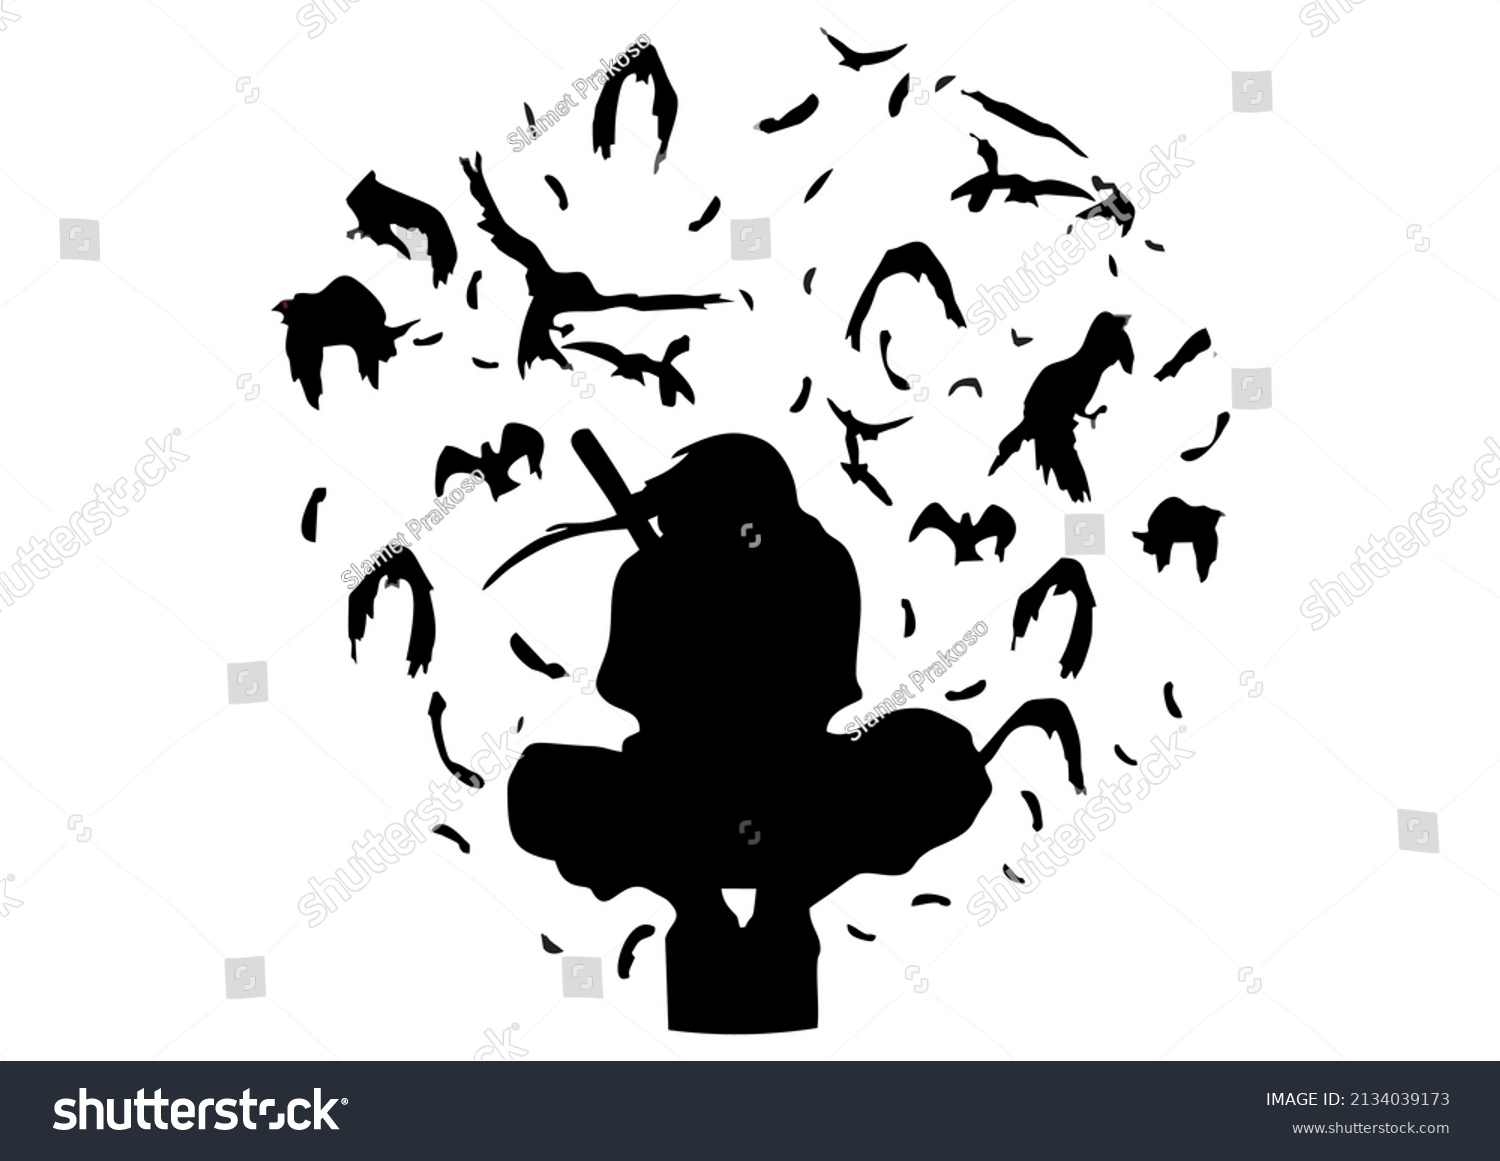 SVG of silhouette illustration of a man in anime style svg